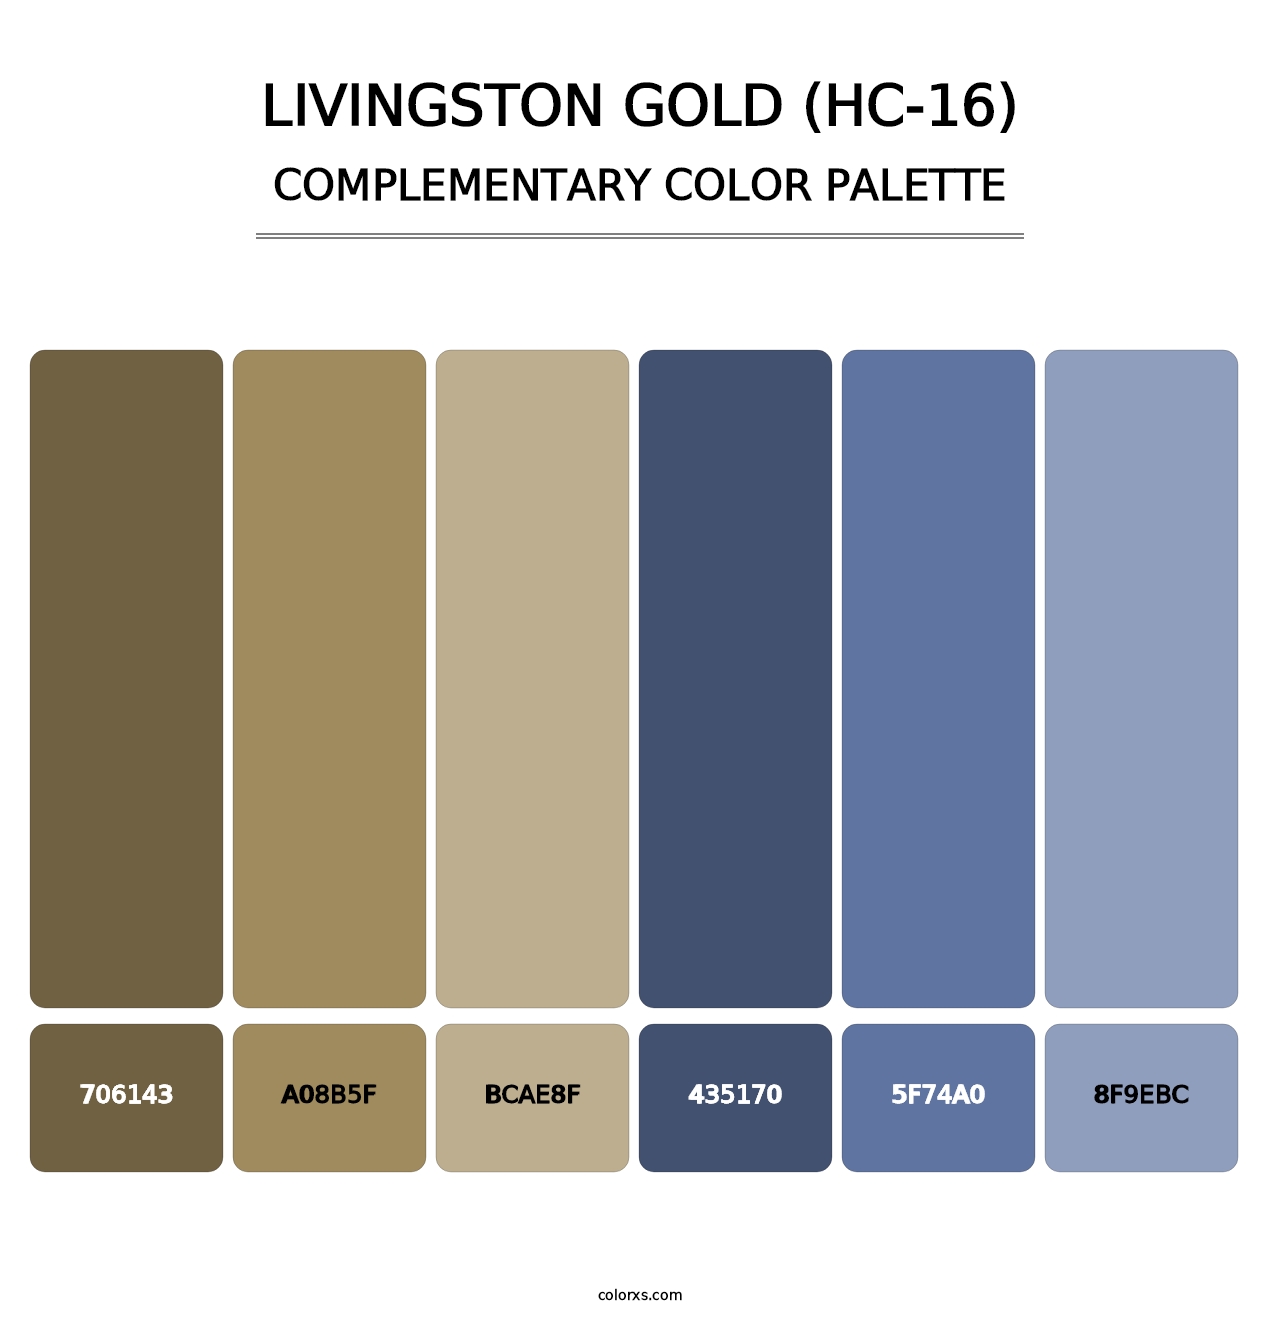 Livingston Gold (HC-16) - Complementary Color Palette